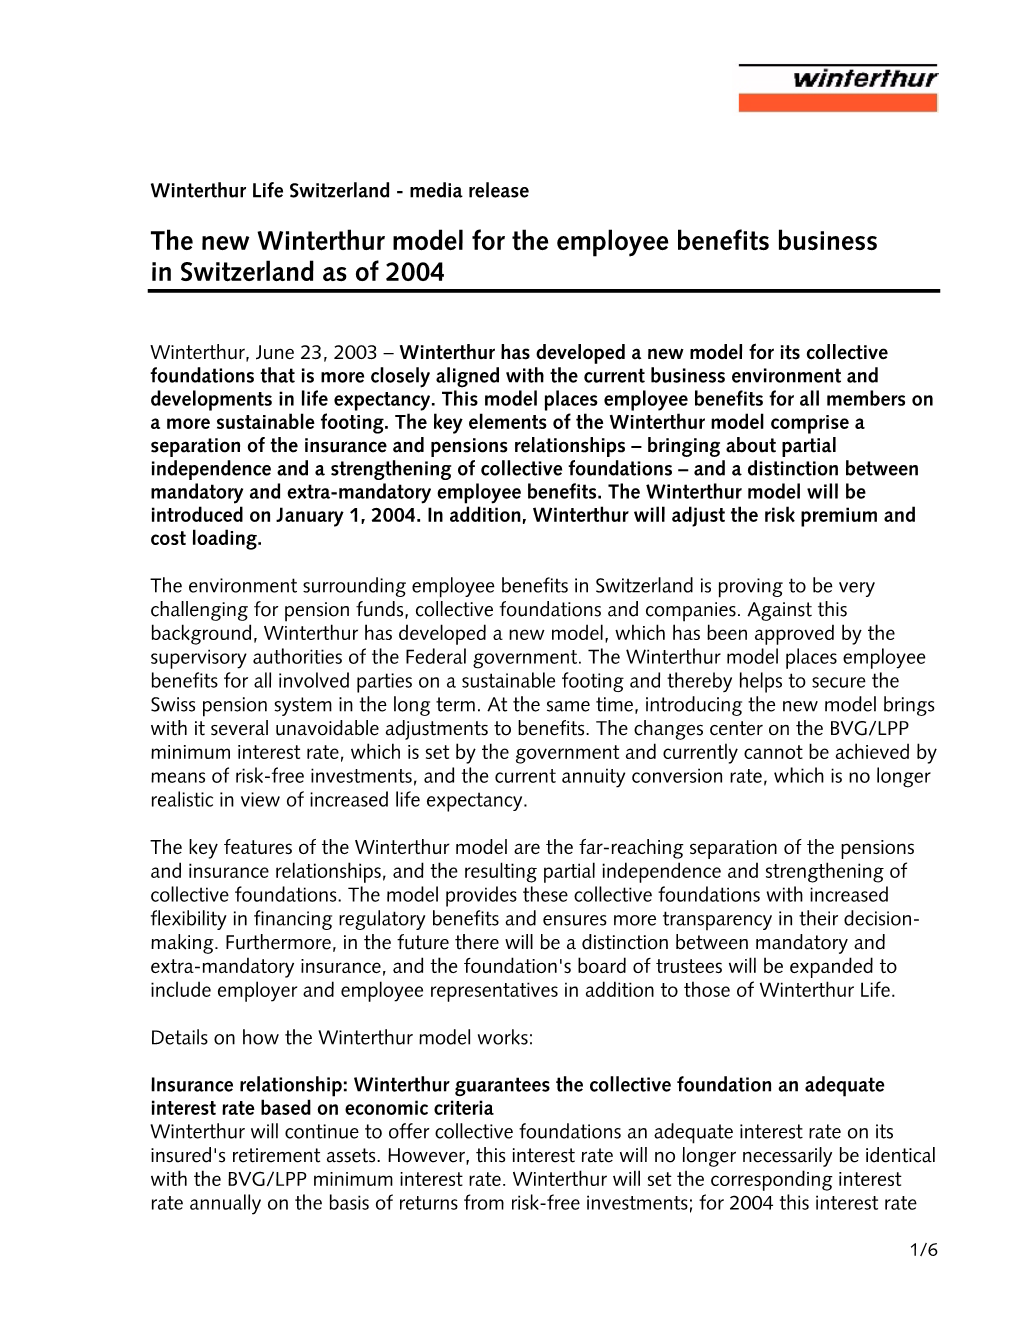 The New Winterthur Model for the Employee Benefits Business in Switzerland As of 2004